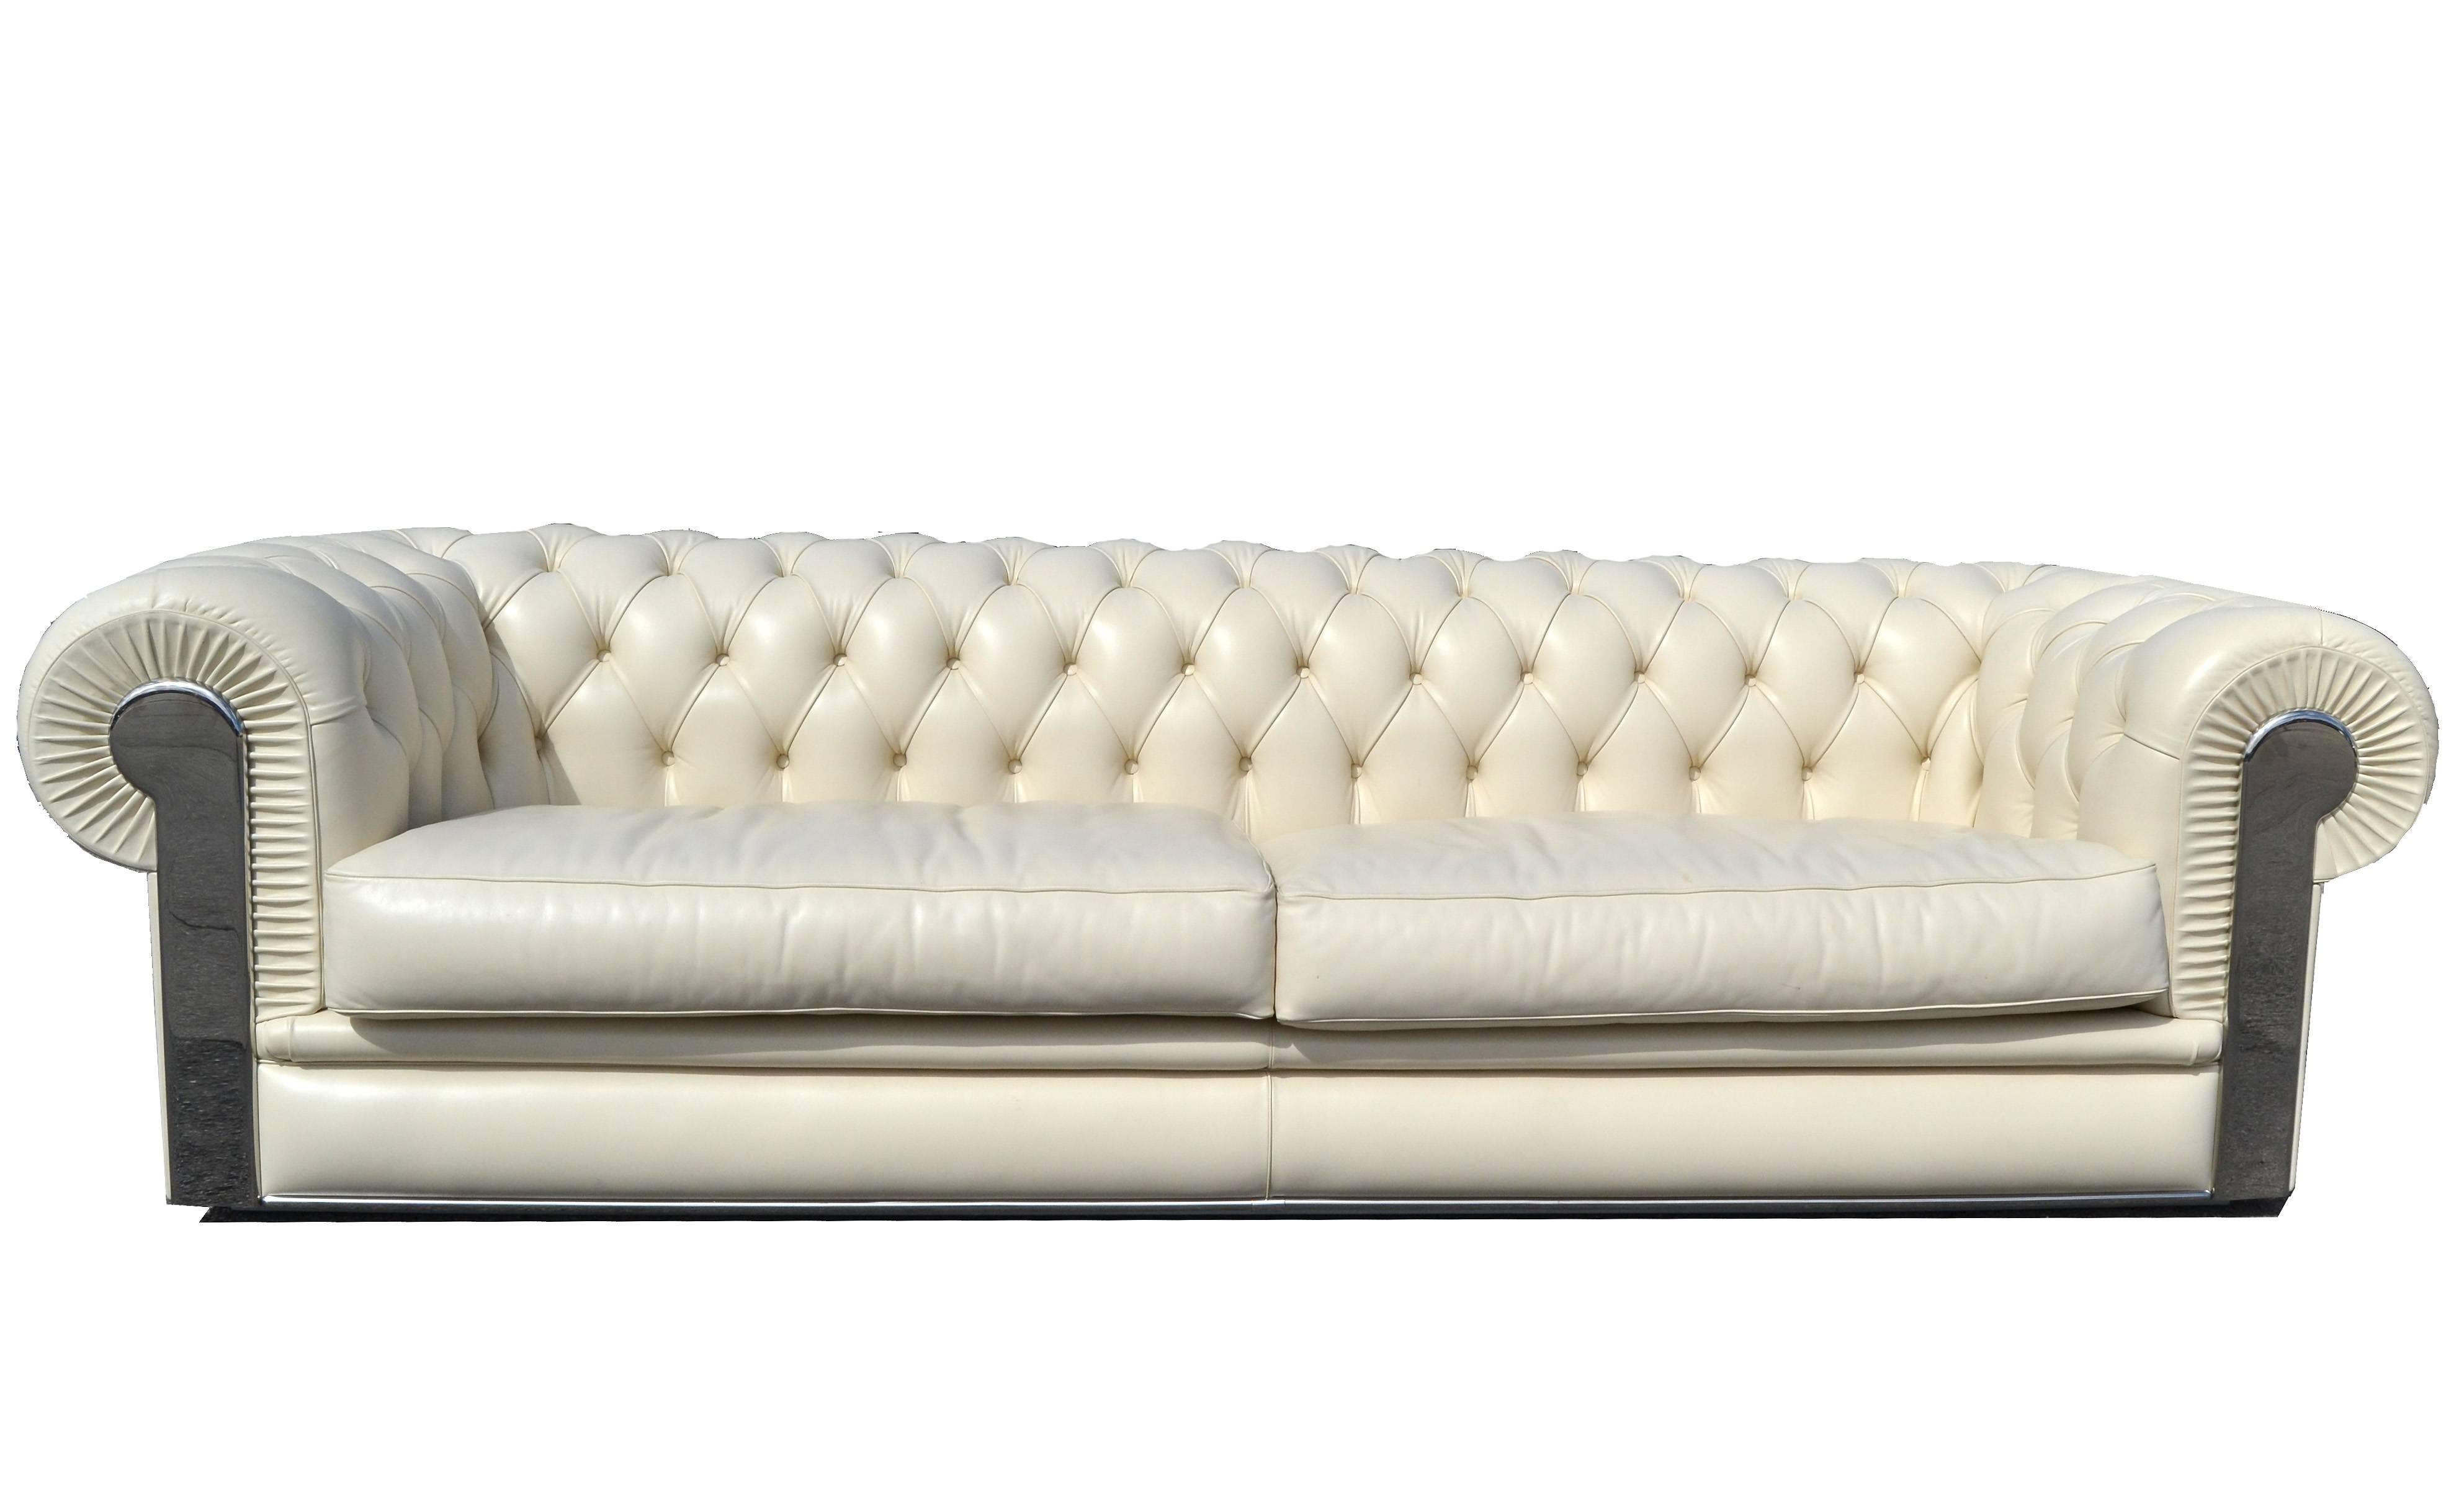 Original Fendi tufted Albino leather sofa in Chesterfield style.
The arms have chrome inlays and it comes with two cushions.
Fendi Casa mark is imprinted in the fabric.
The leather is very soft and in excellent condition.
Measure: Seat height